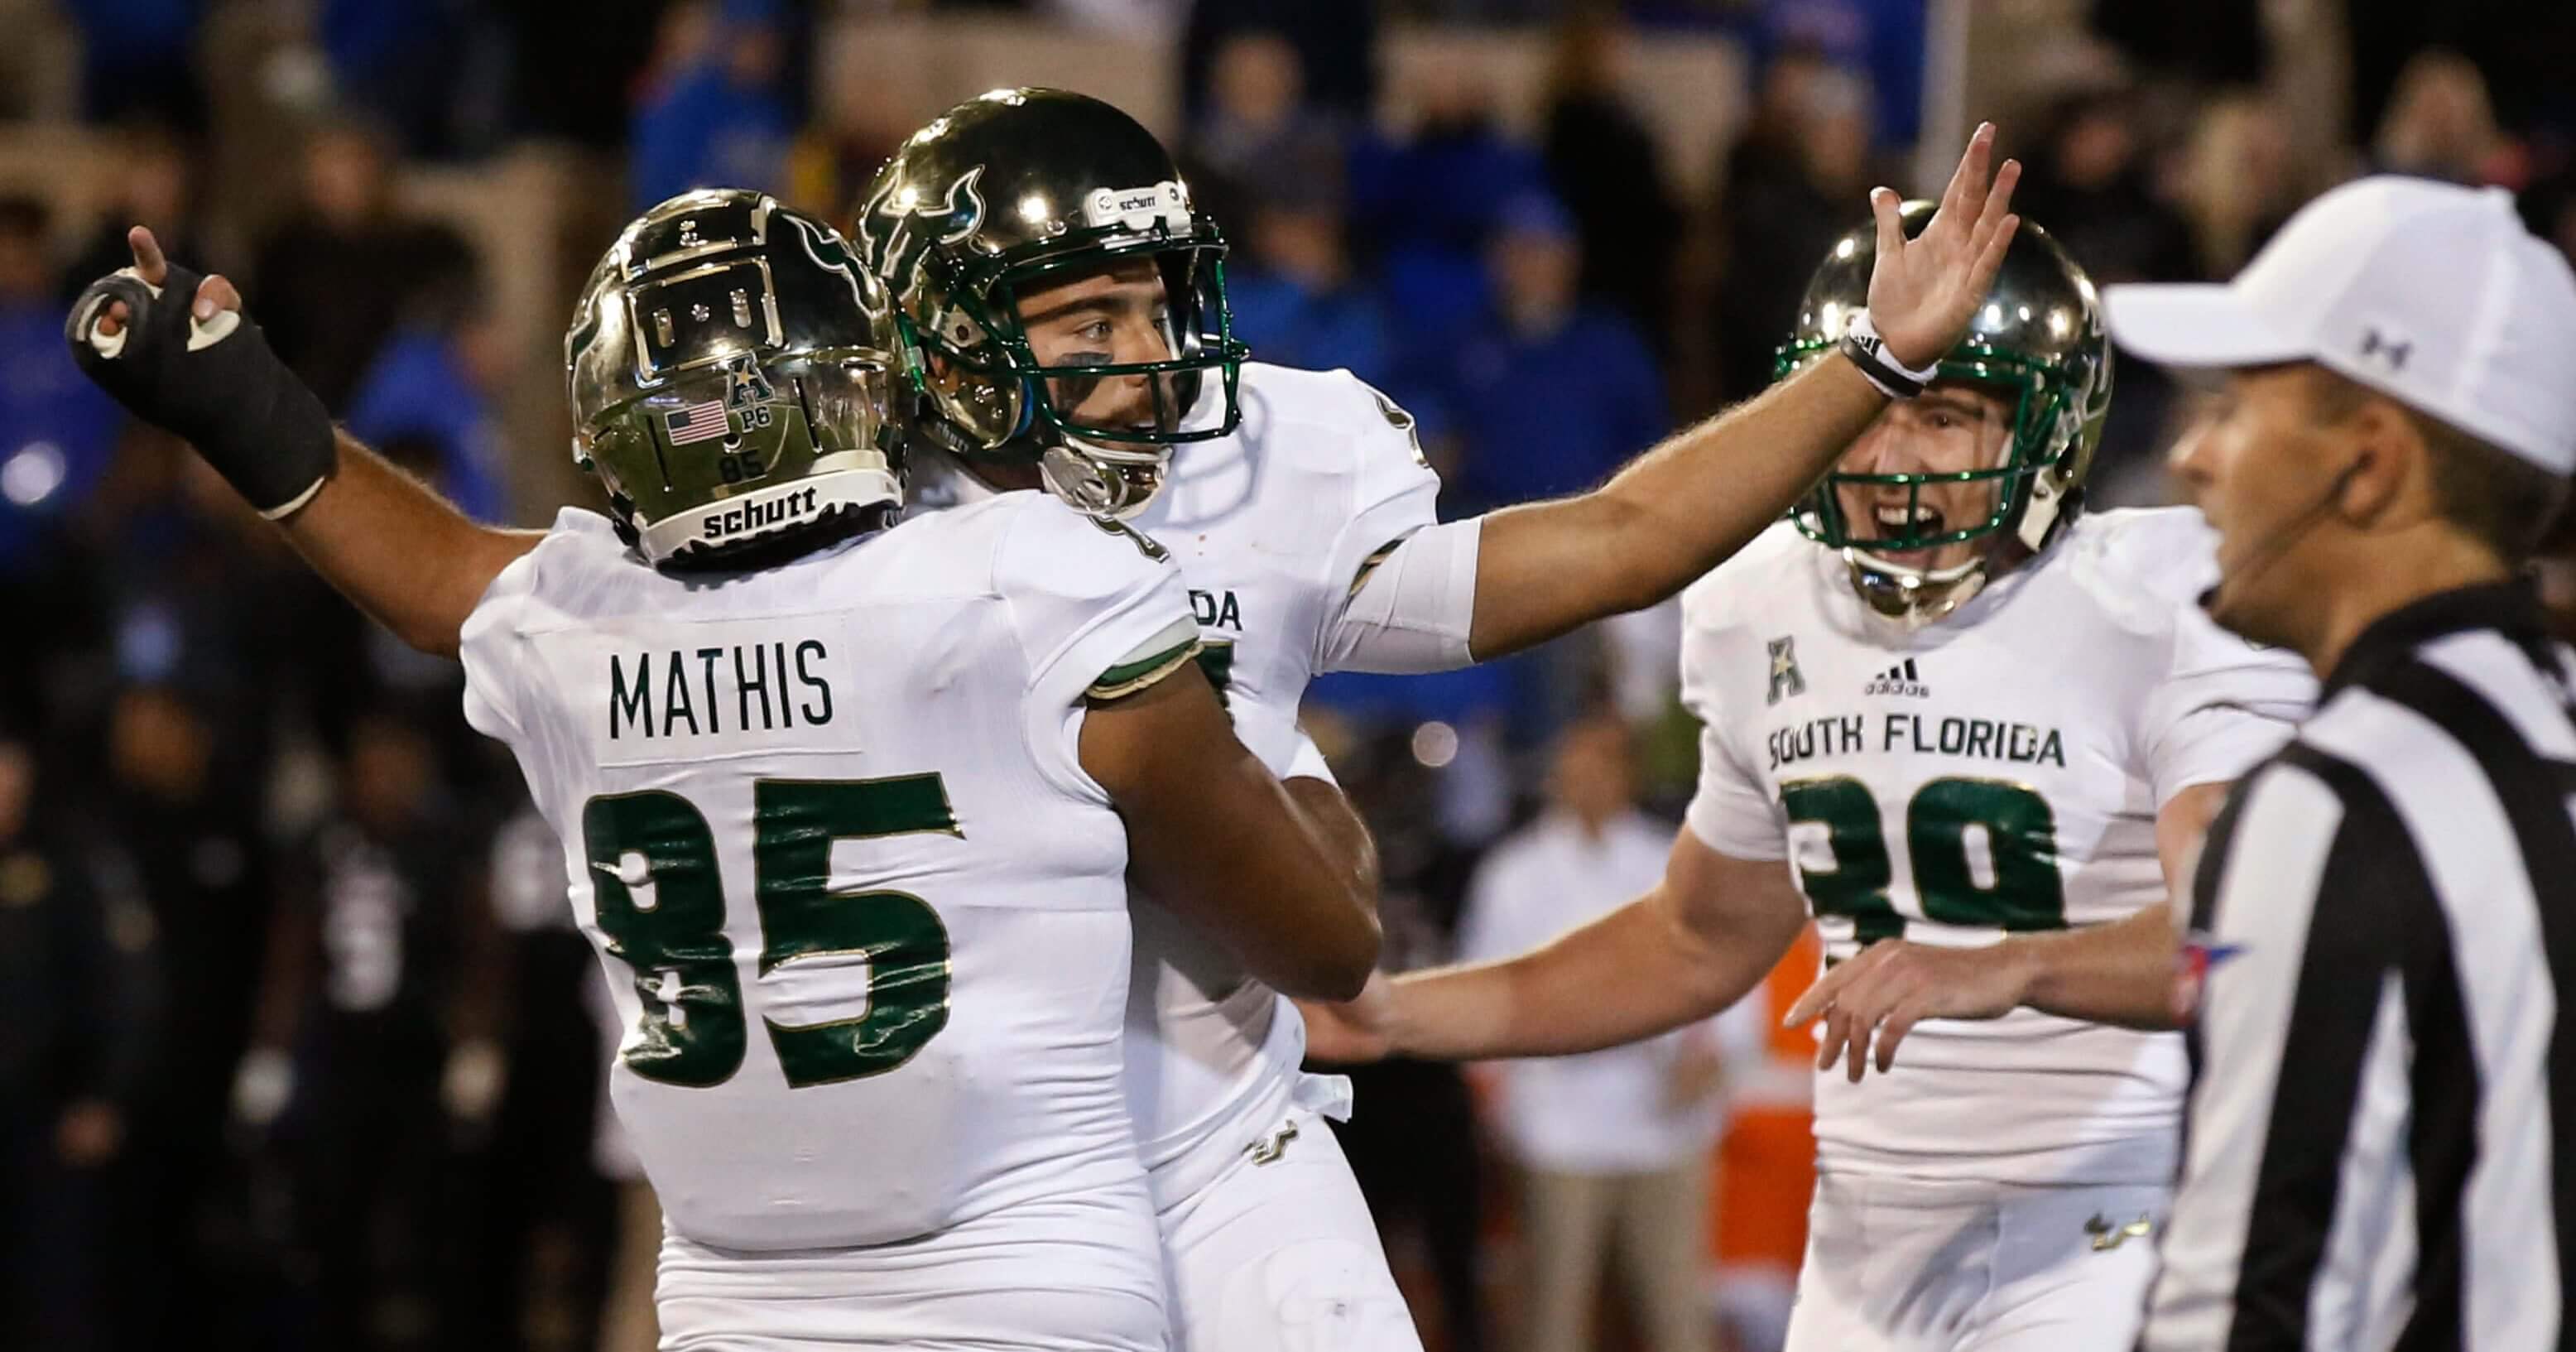 South Florida's Coby Weiss, center, celebrates with teammates Jacob Mathis (85) and Trent Schneider (39) after kicking the go-ahead field goal in a game against Tulsa on Friday night.